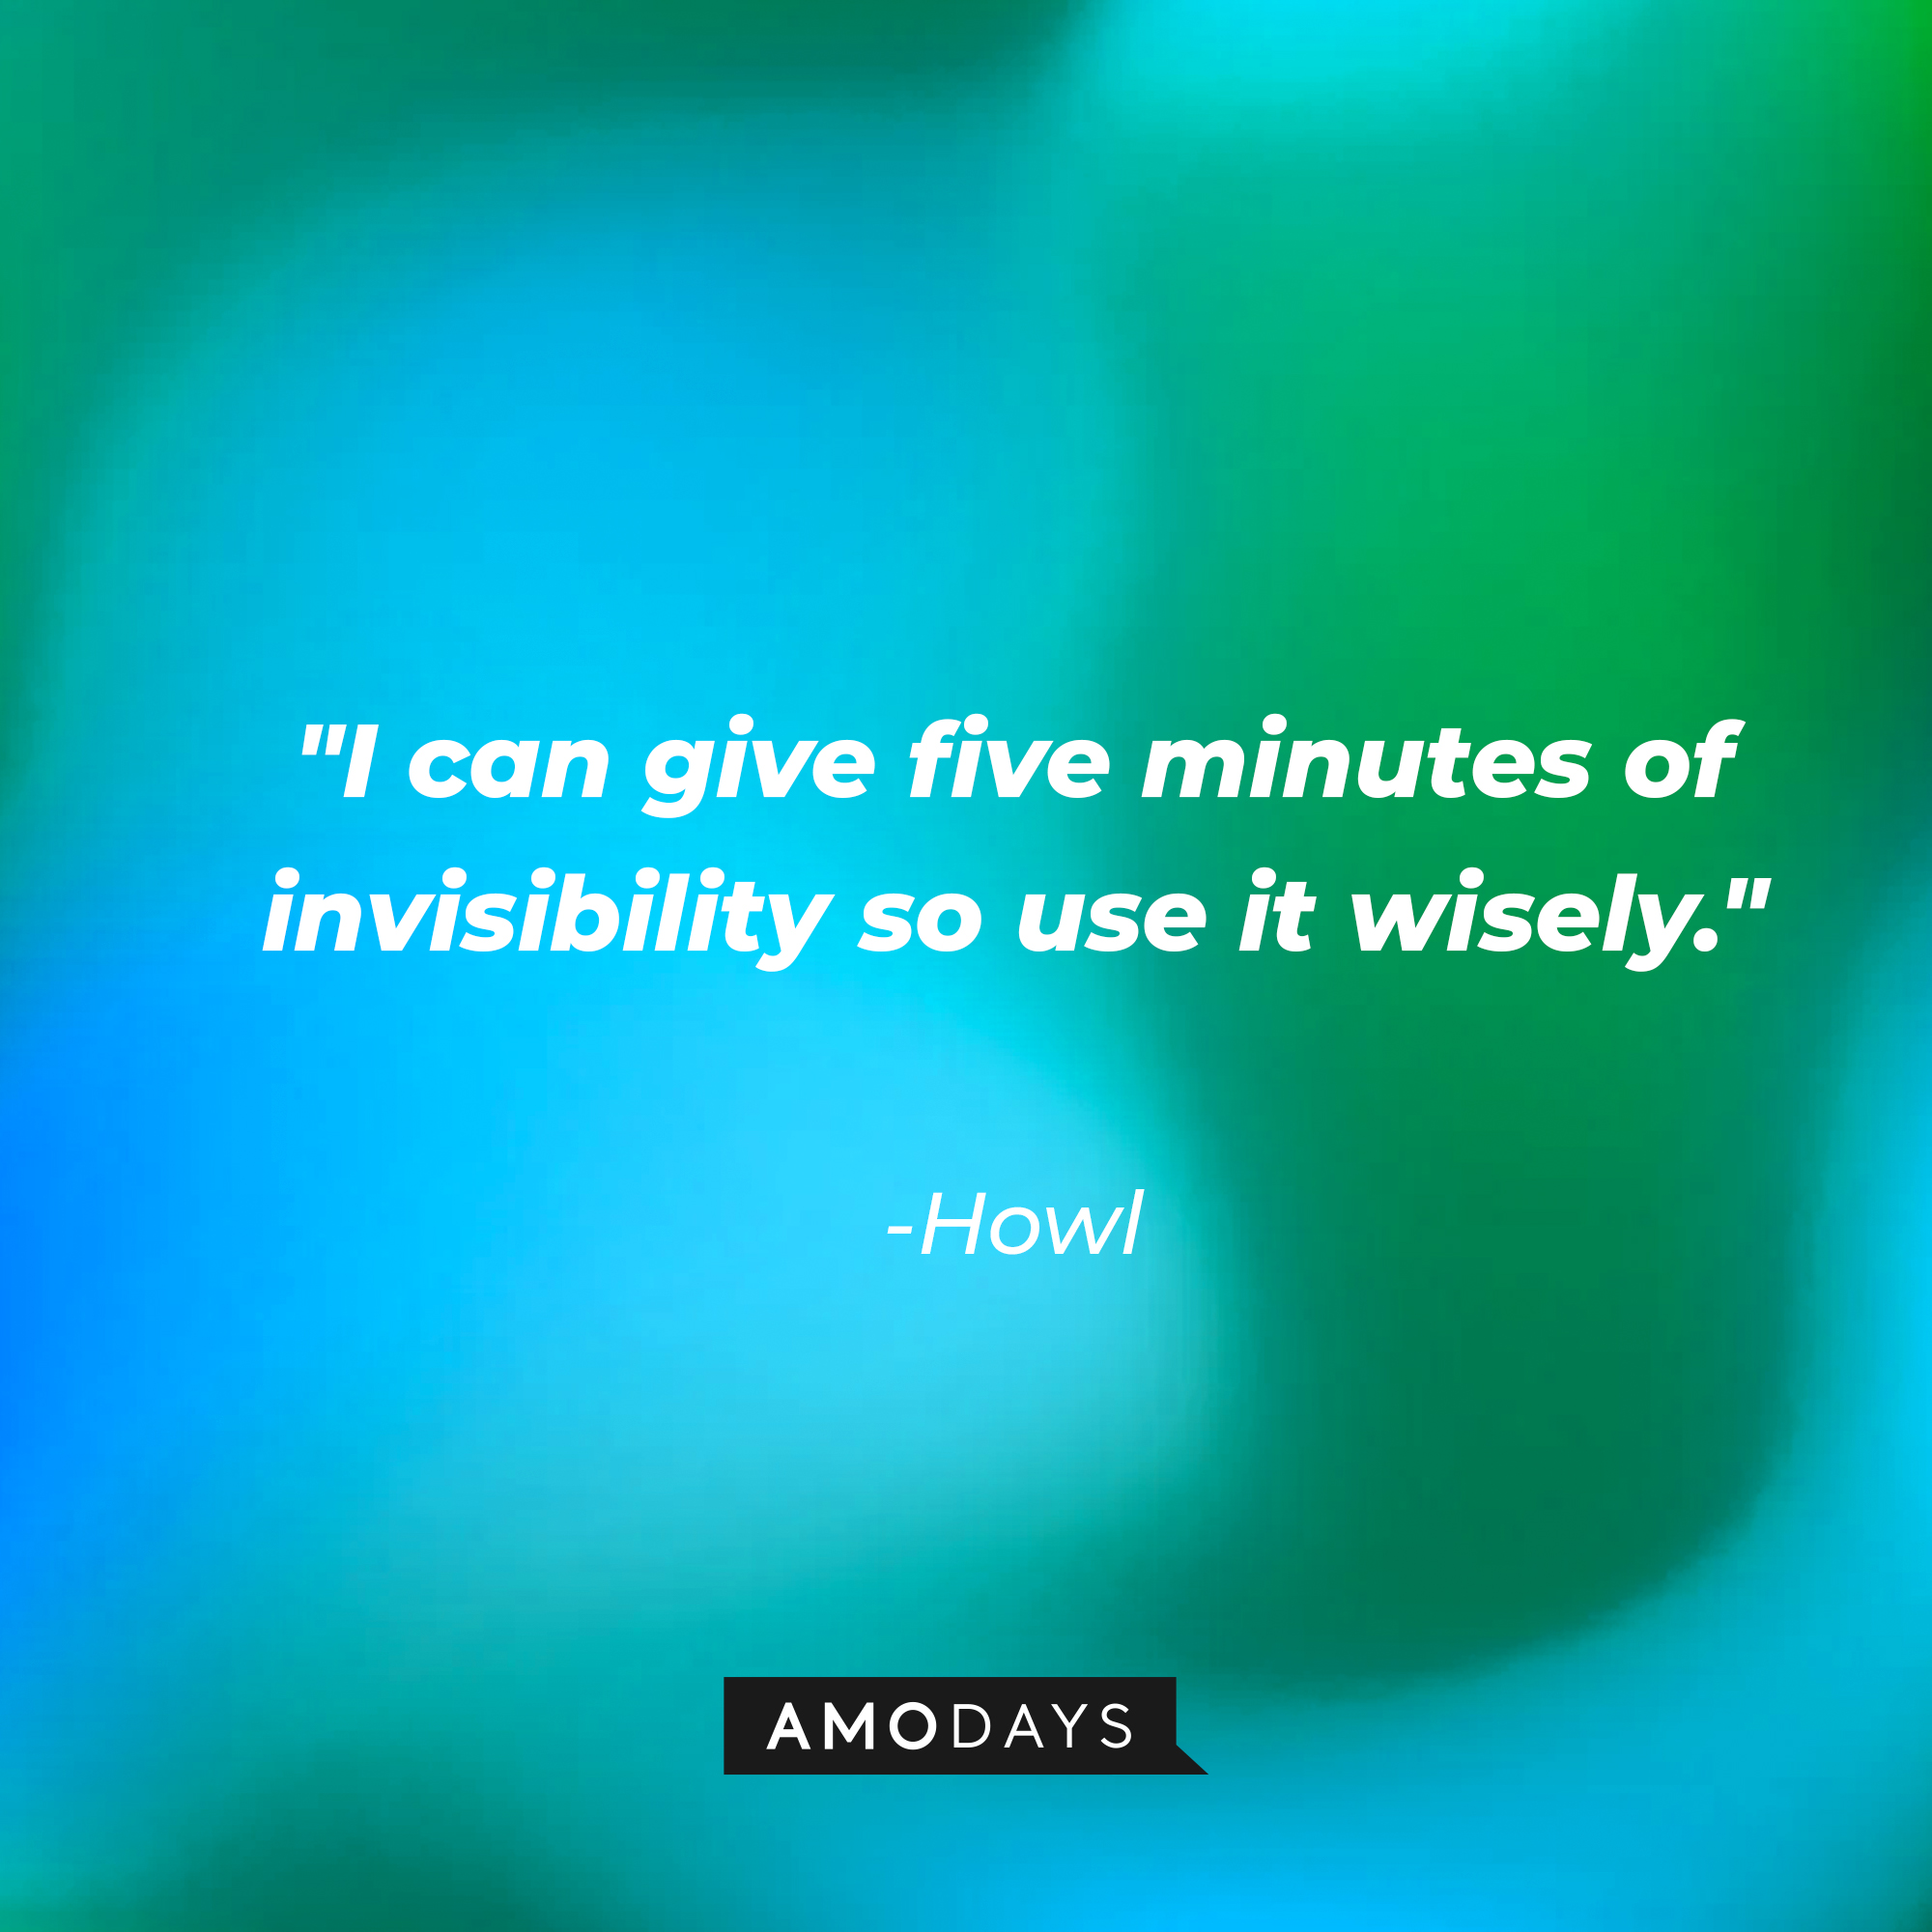 Howl's quote: "I can give five minutes of invisibility so use it wisely." | Source: Amodays